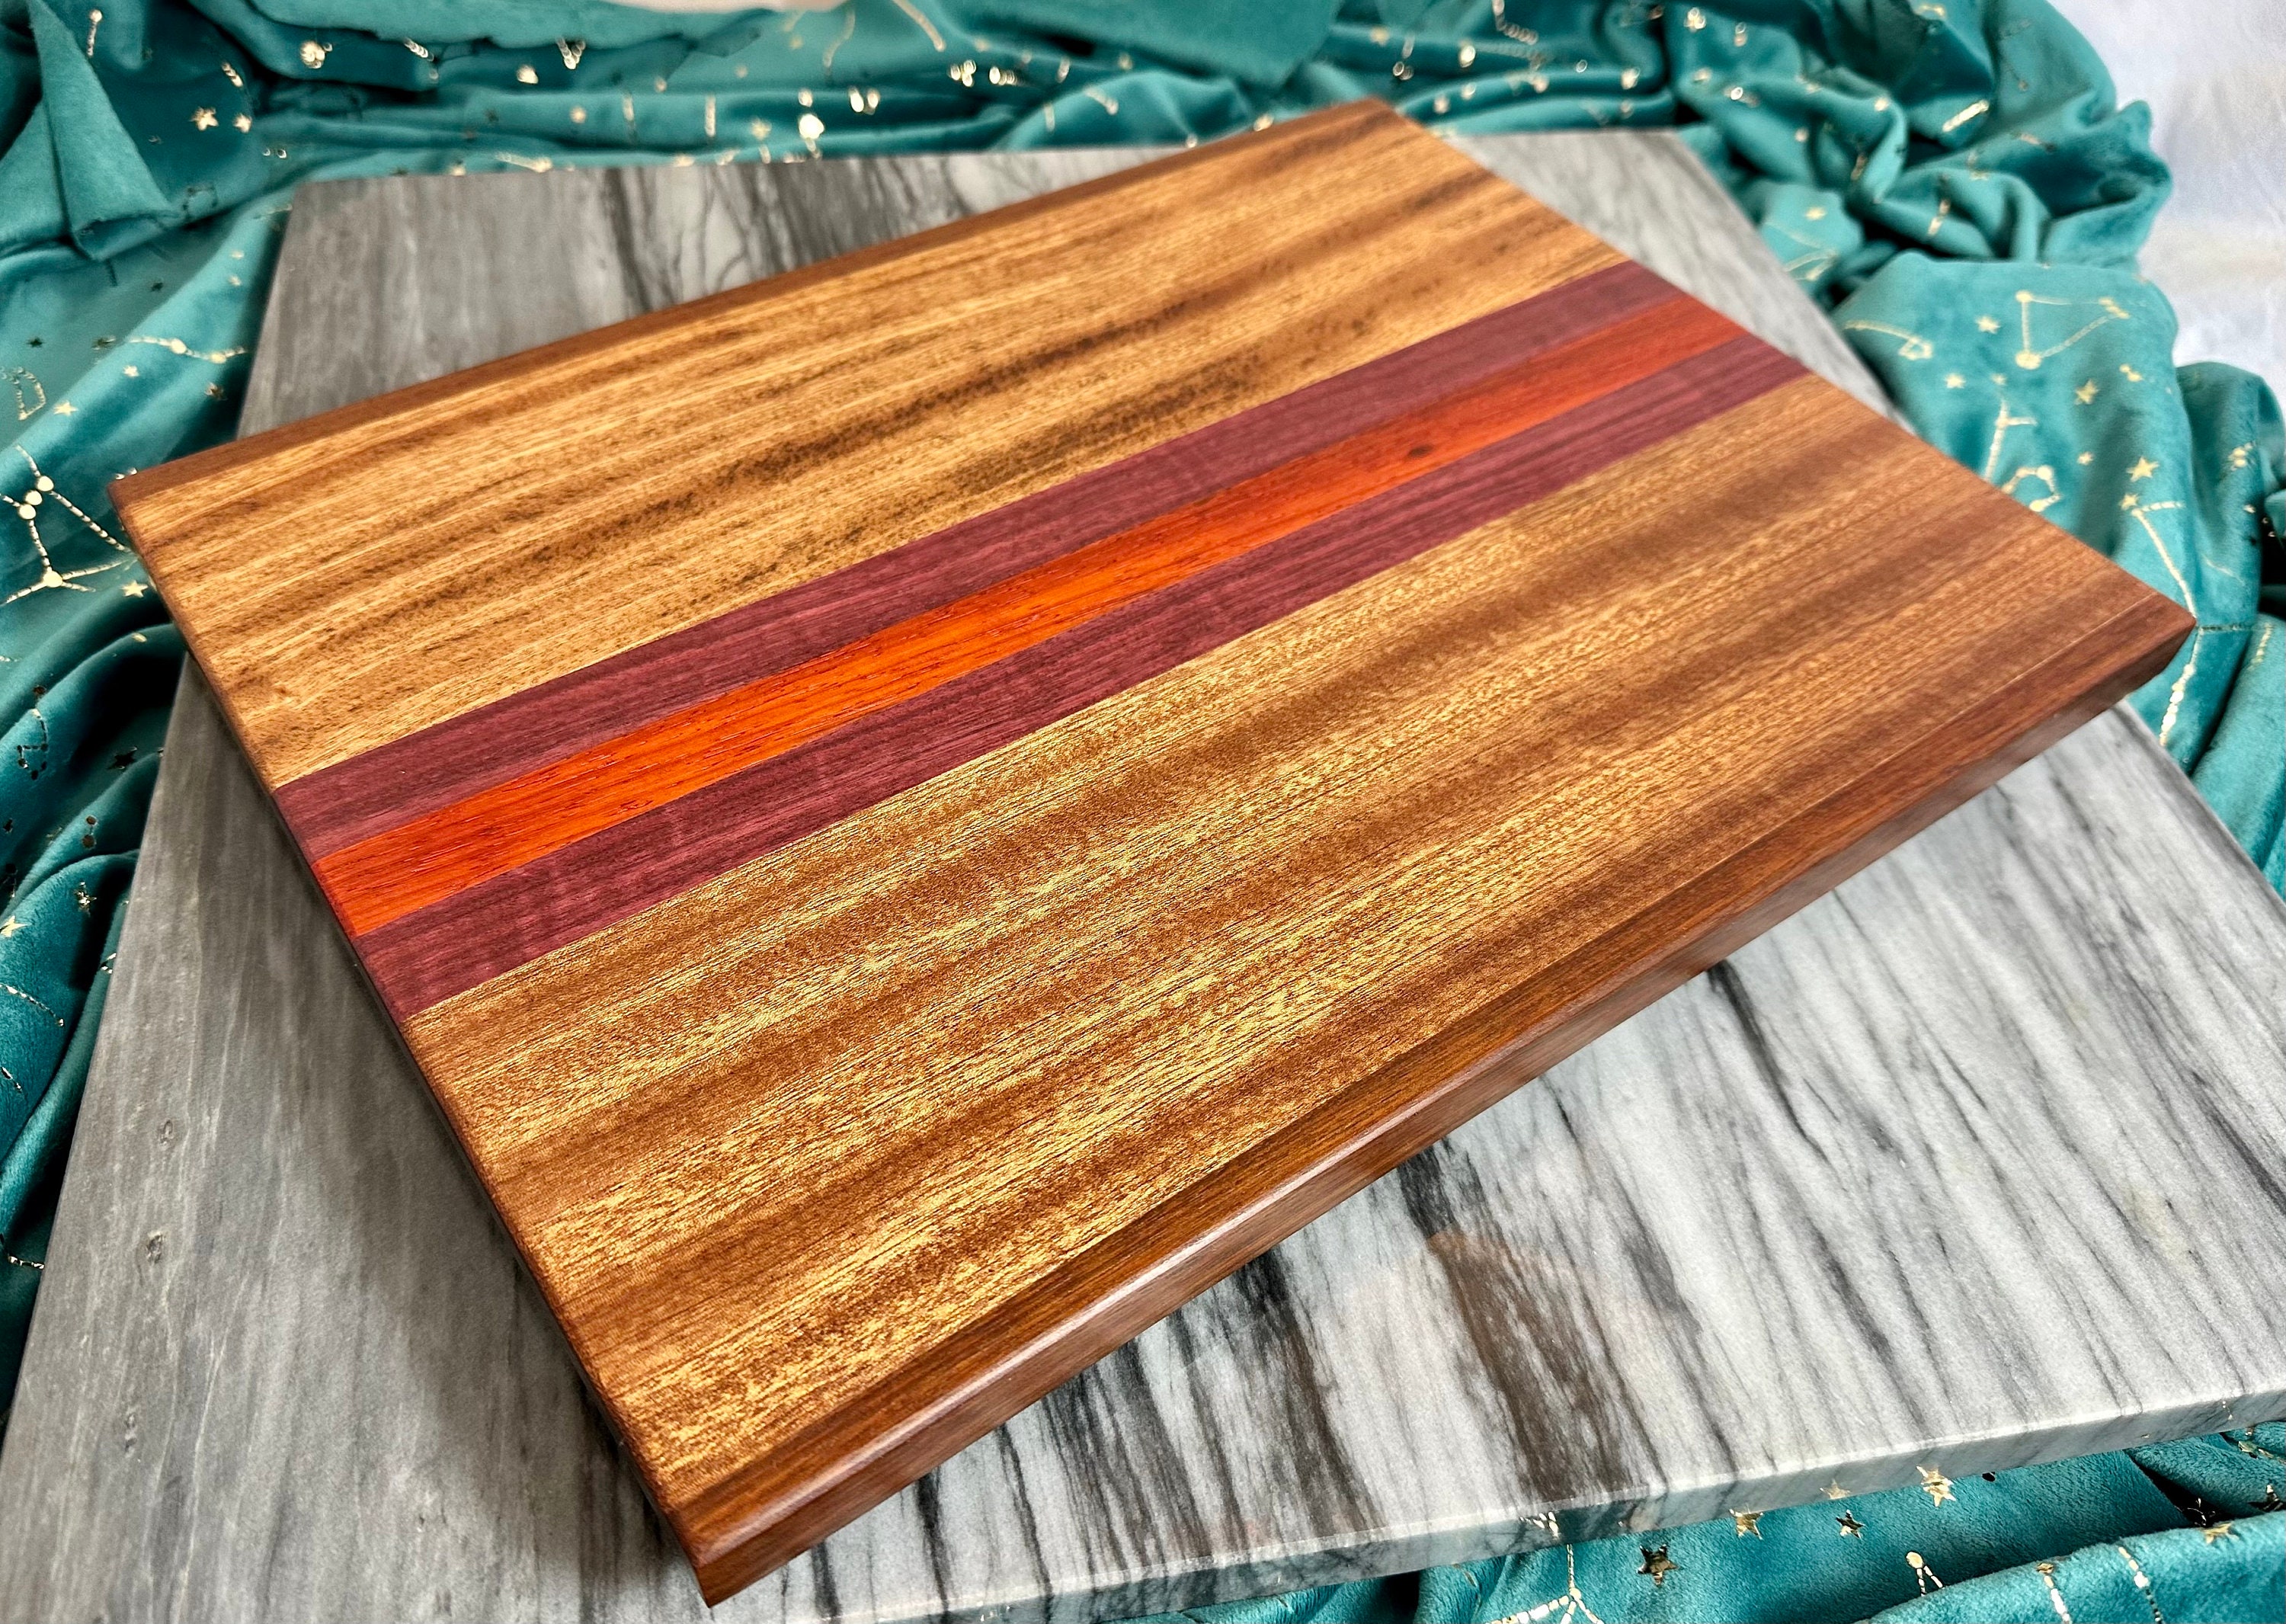 Solid Cherry Wood Plank/Board